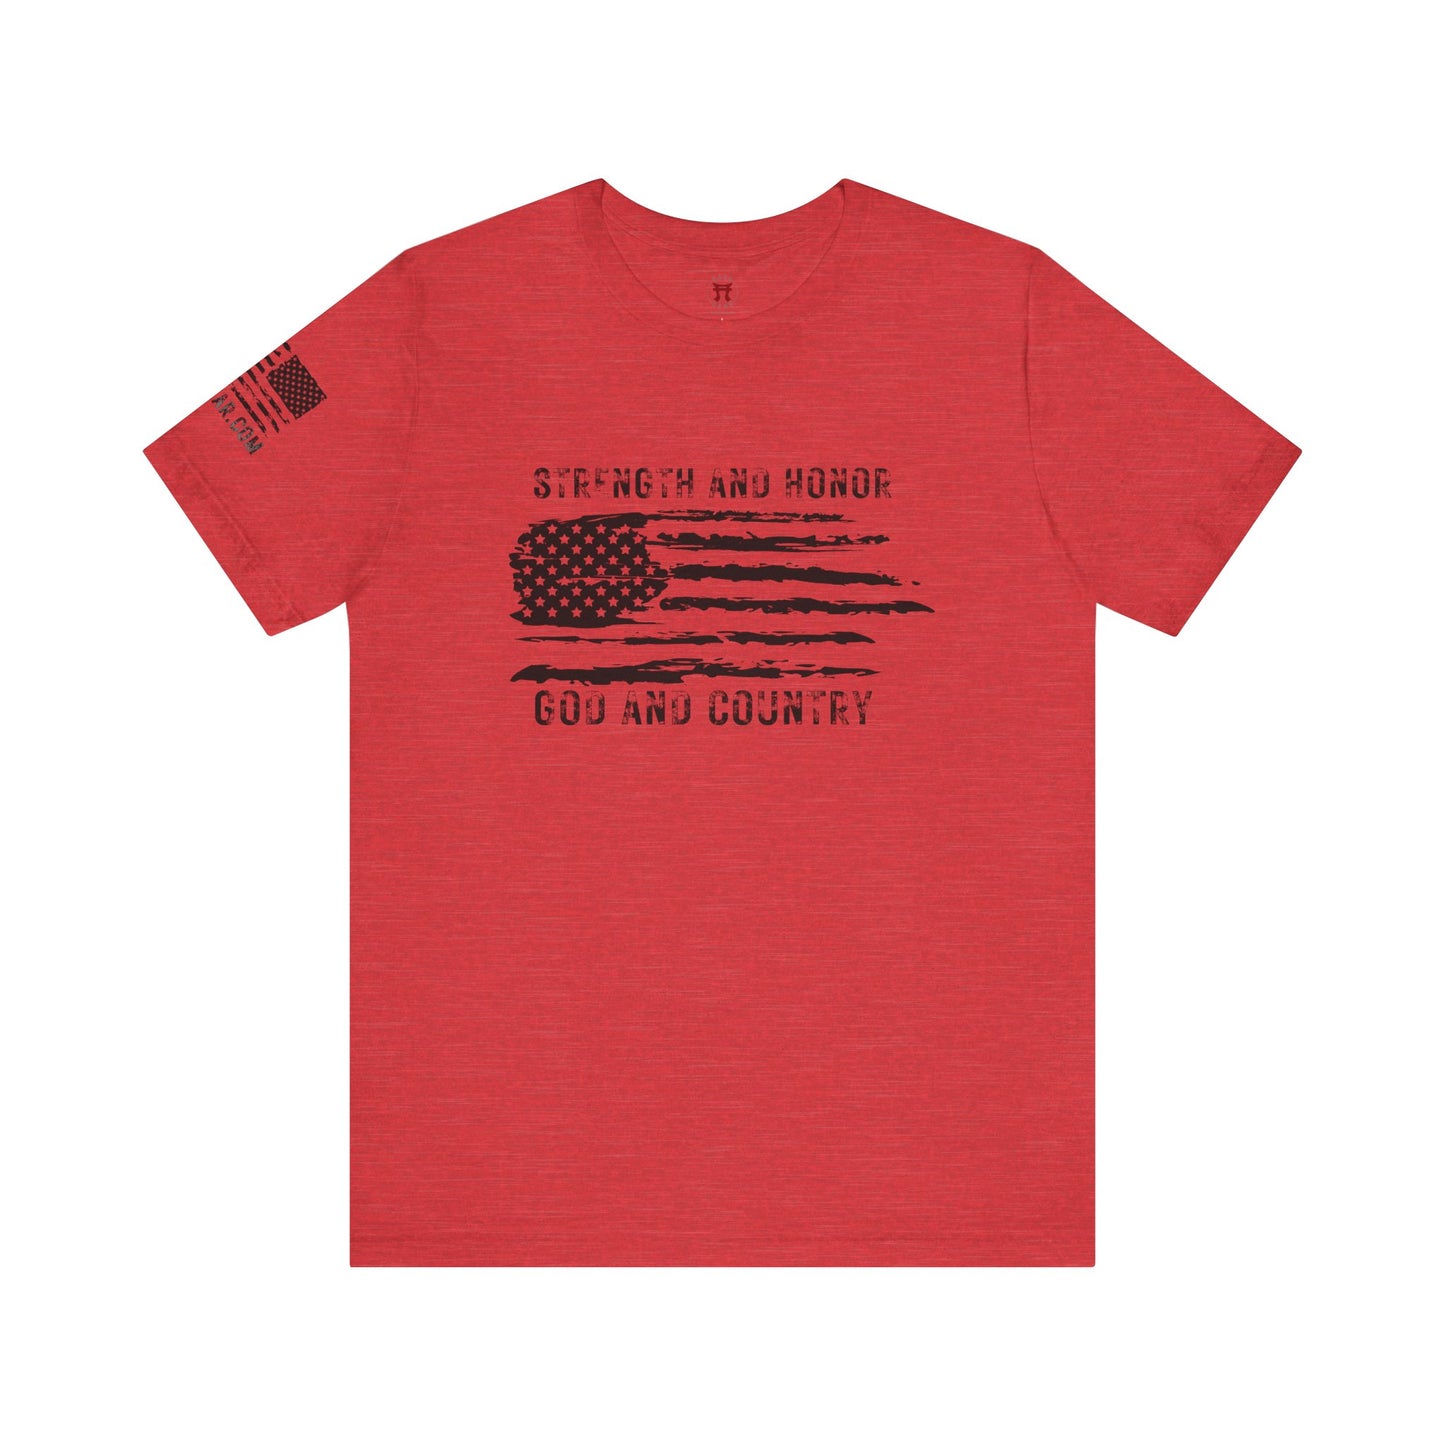 Rakkgear GOD and Country Short Sleeve Tee in red